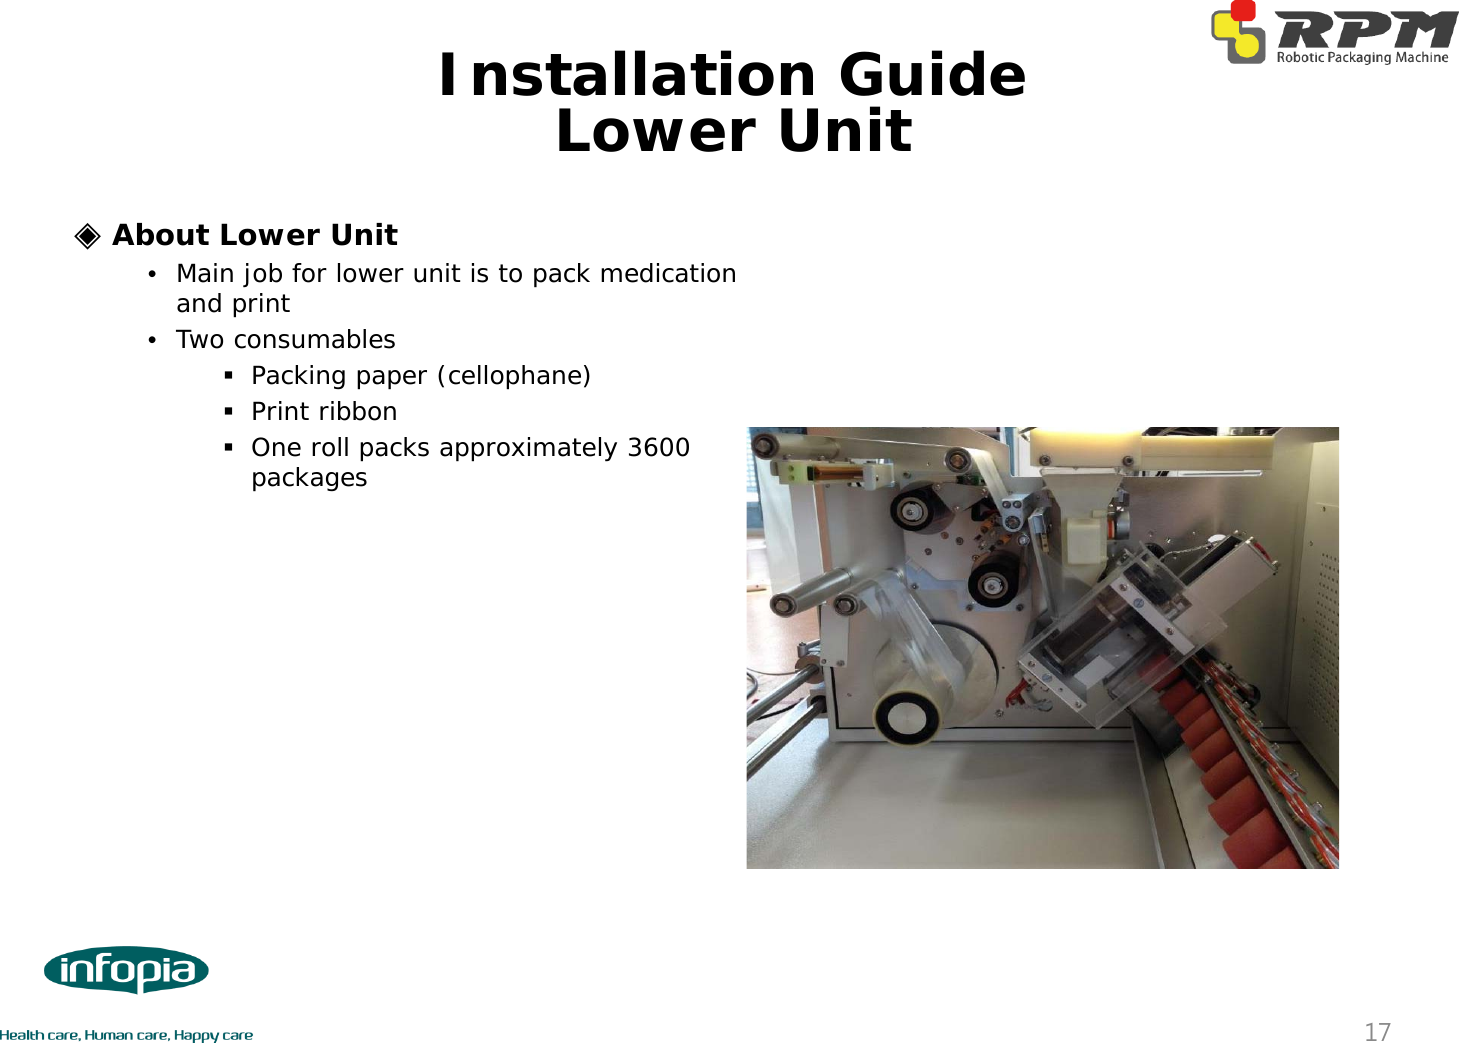 17Lower Unit◈About Lower Unit•Main job for lower unit is to pack medication and print•Two consumablesPacking paper (cellophane)Print ribbonOne roll packs approximately 3600 packagesInstallation Guide